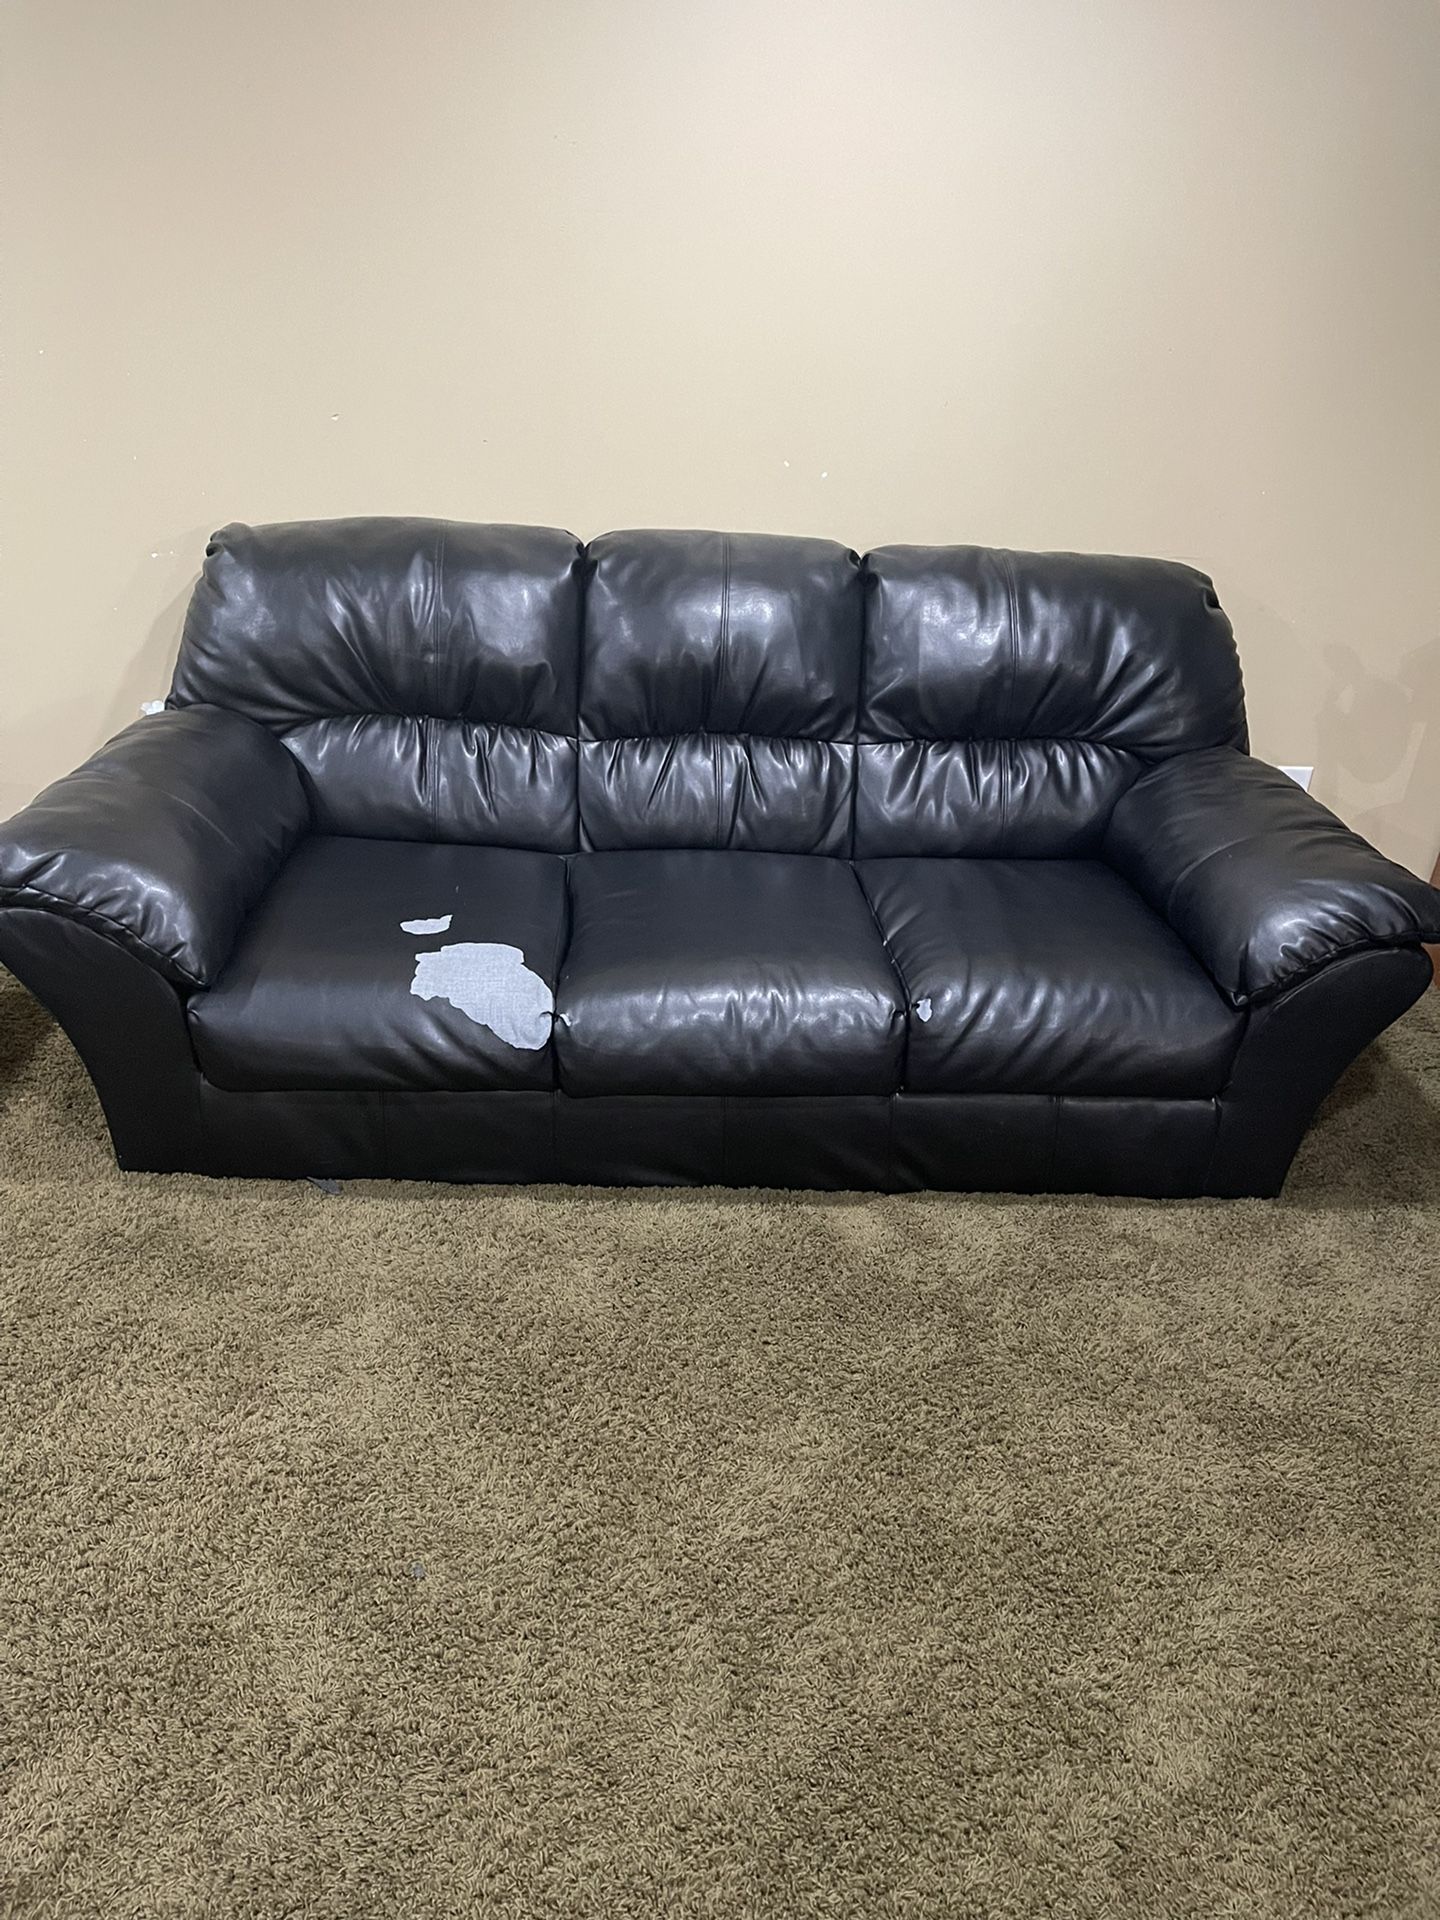 Two leather sofa and one chair